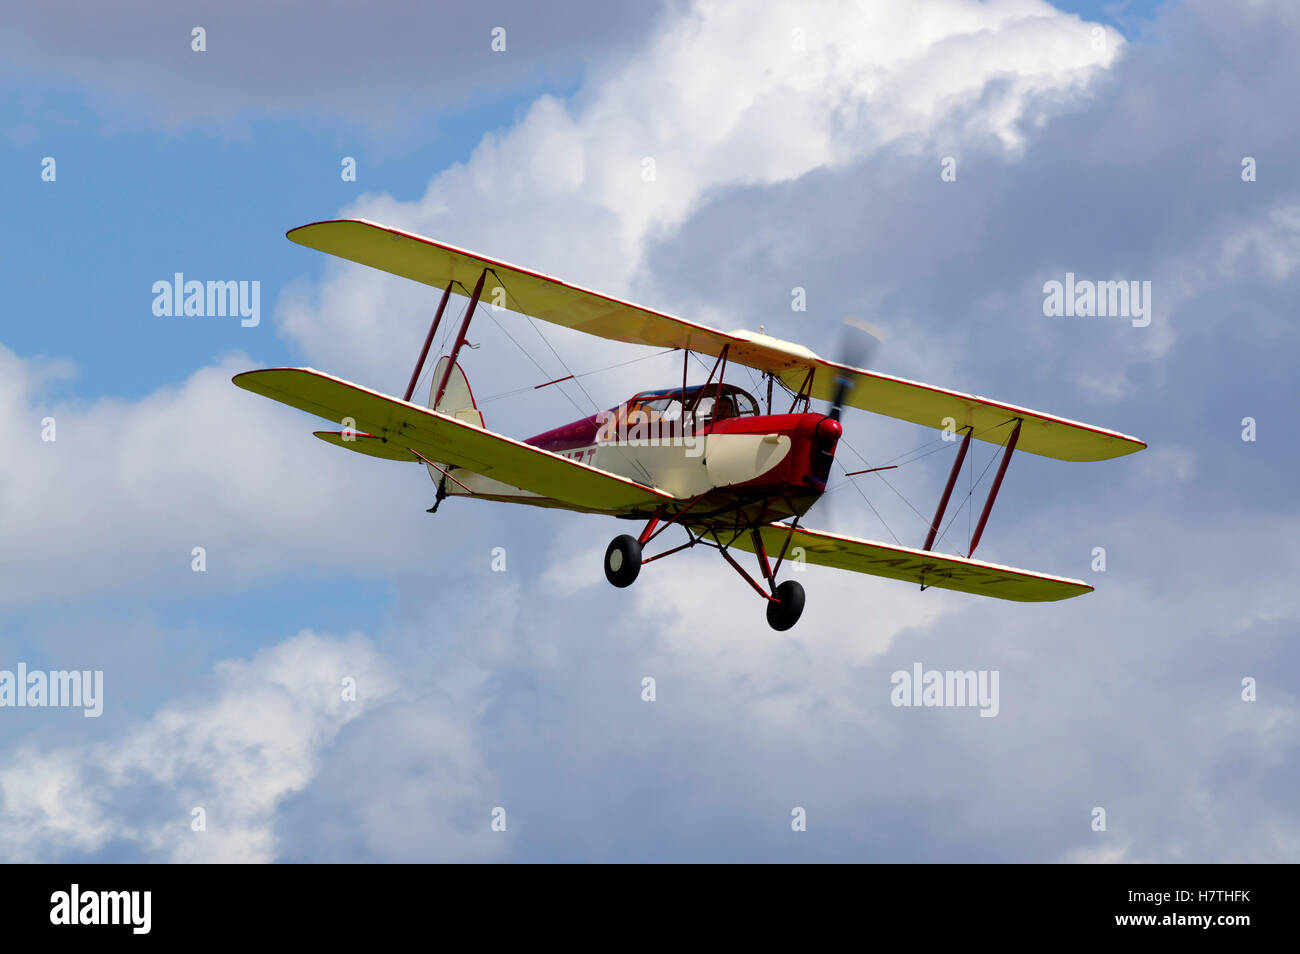 Thruxton Jackaroo, G-ANZT, East Kirkby, Lincolnshire, Angleterre, Royaume-Uni. Banque D'Images